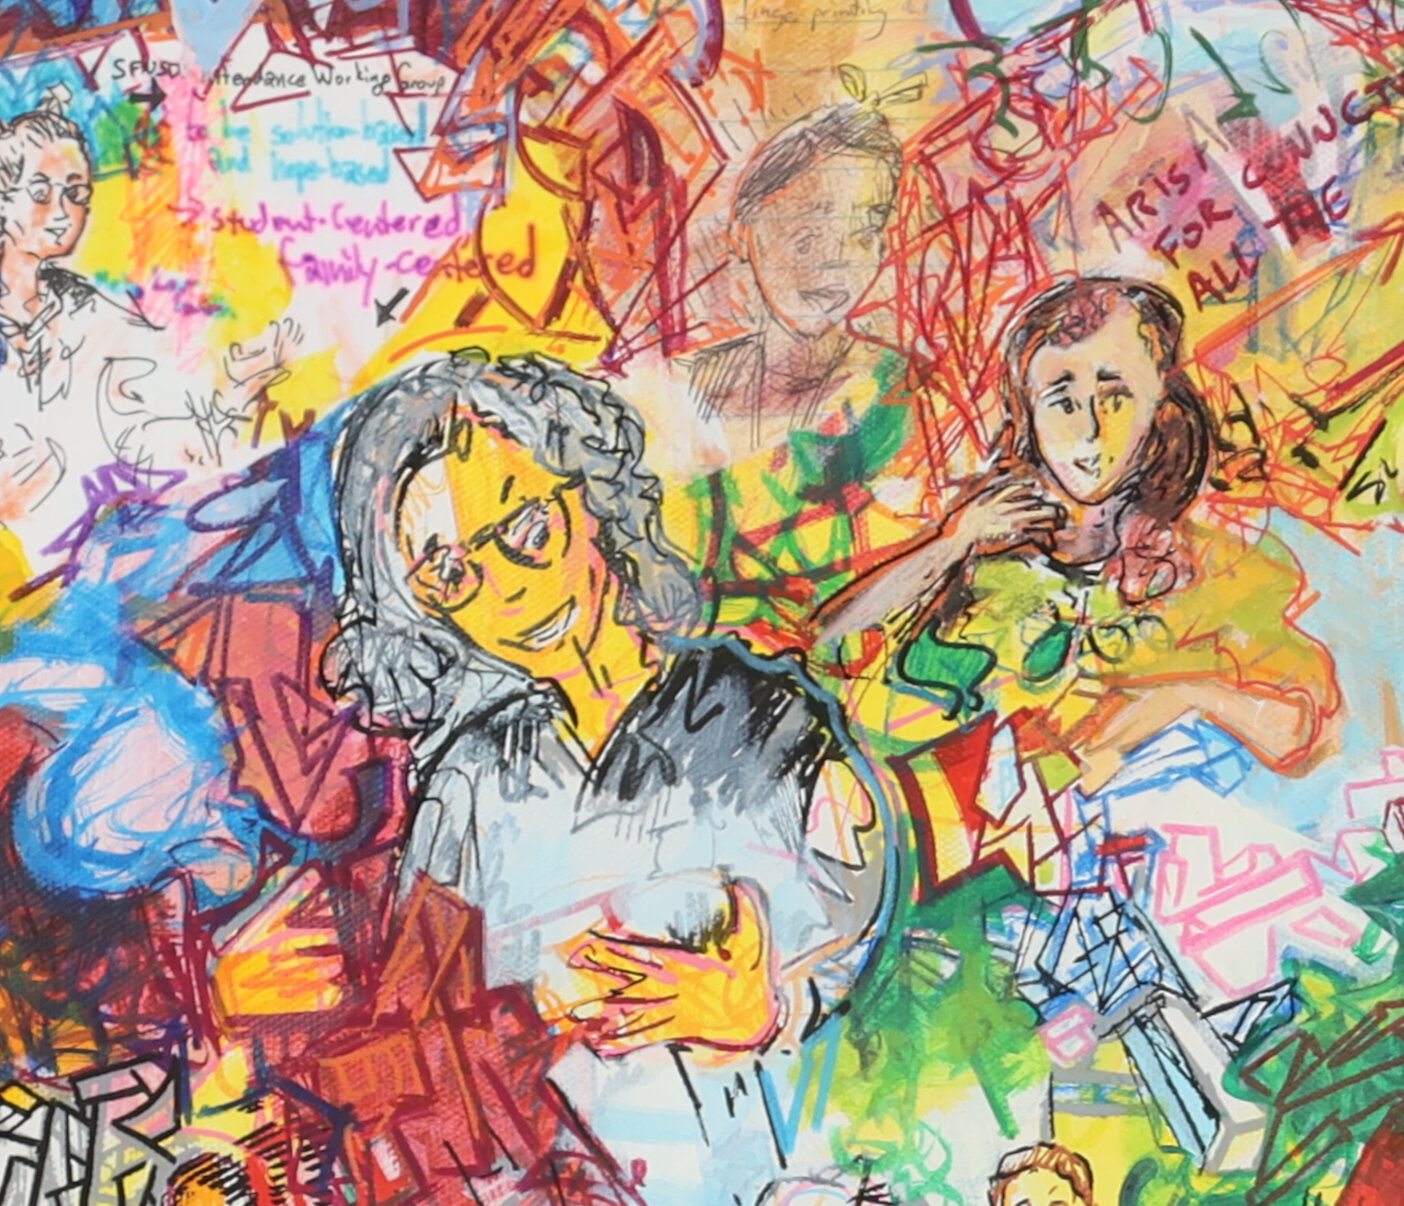  Ruth Grabowski and Stefanie Eldred, in the foreground, lead the Community Partnerships office at the SFUSD. Much of the material in this painting are notes from meetings they organized.    I love their passion for their work and their insistence on 